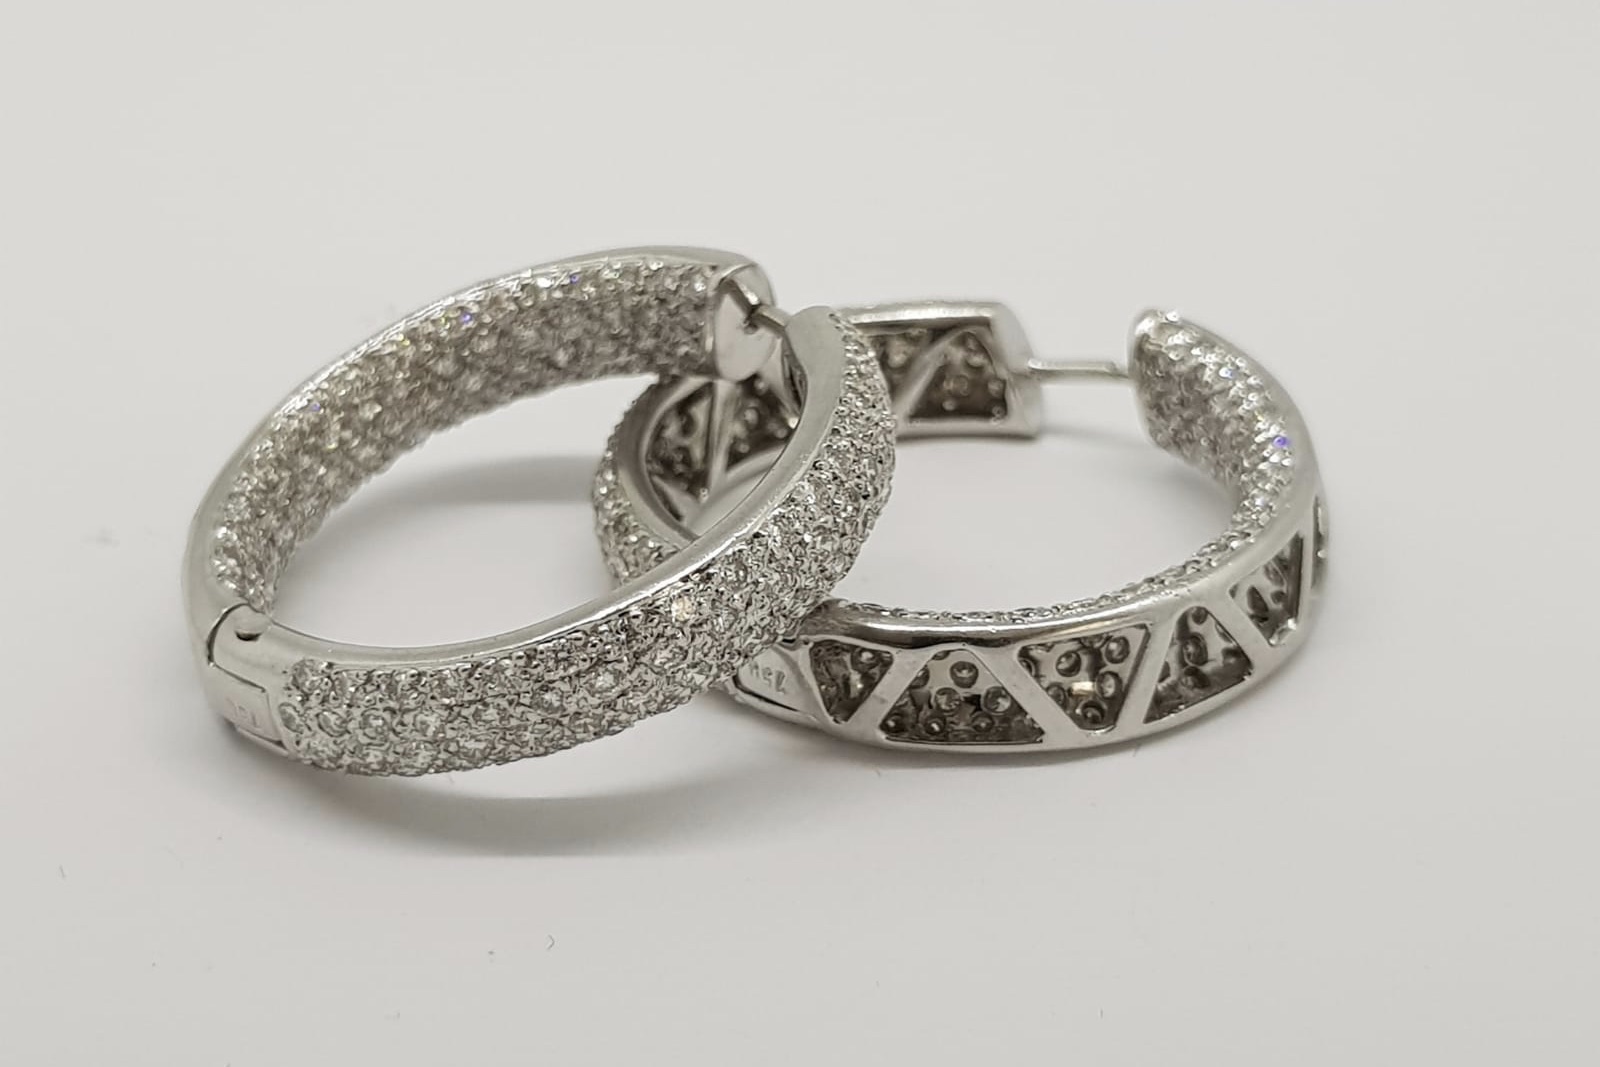 Pair Of Pave Set Diamond Hoop Earrings, with full circle illusion for pierced ears, they are